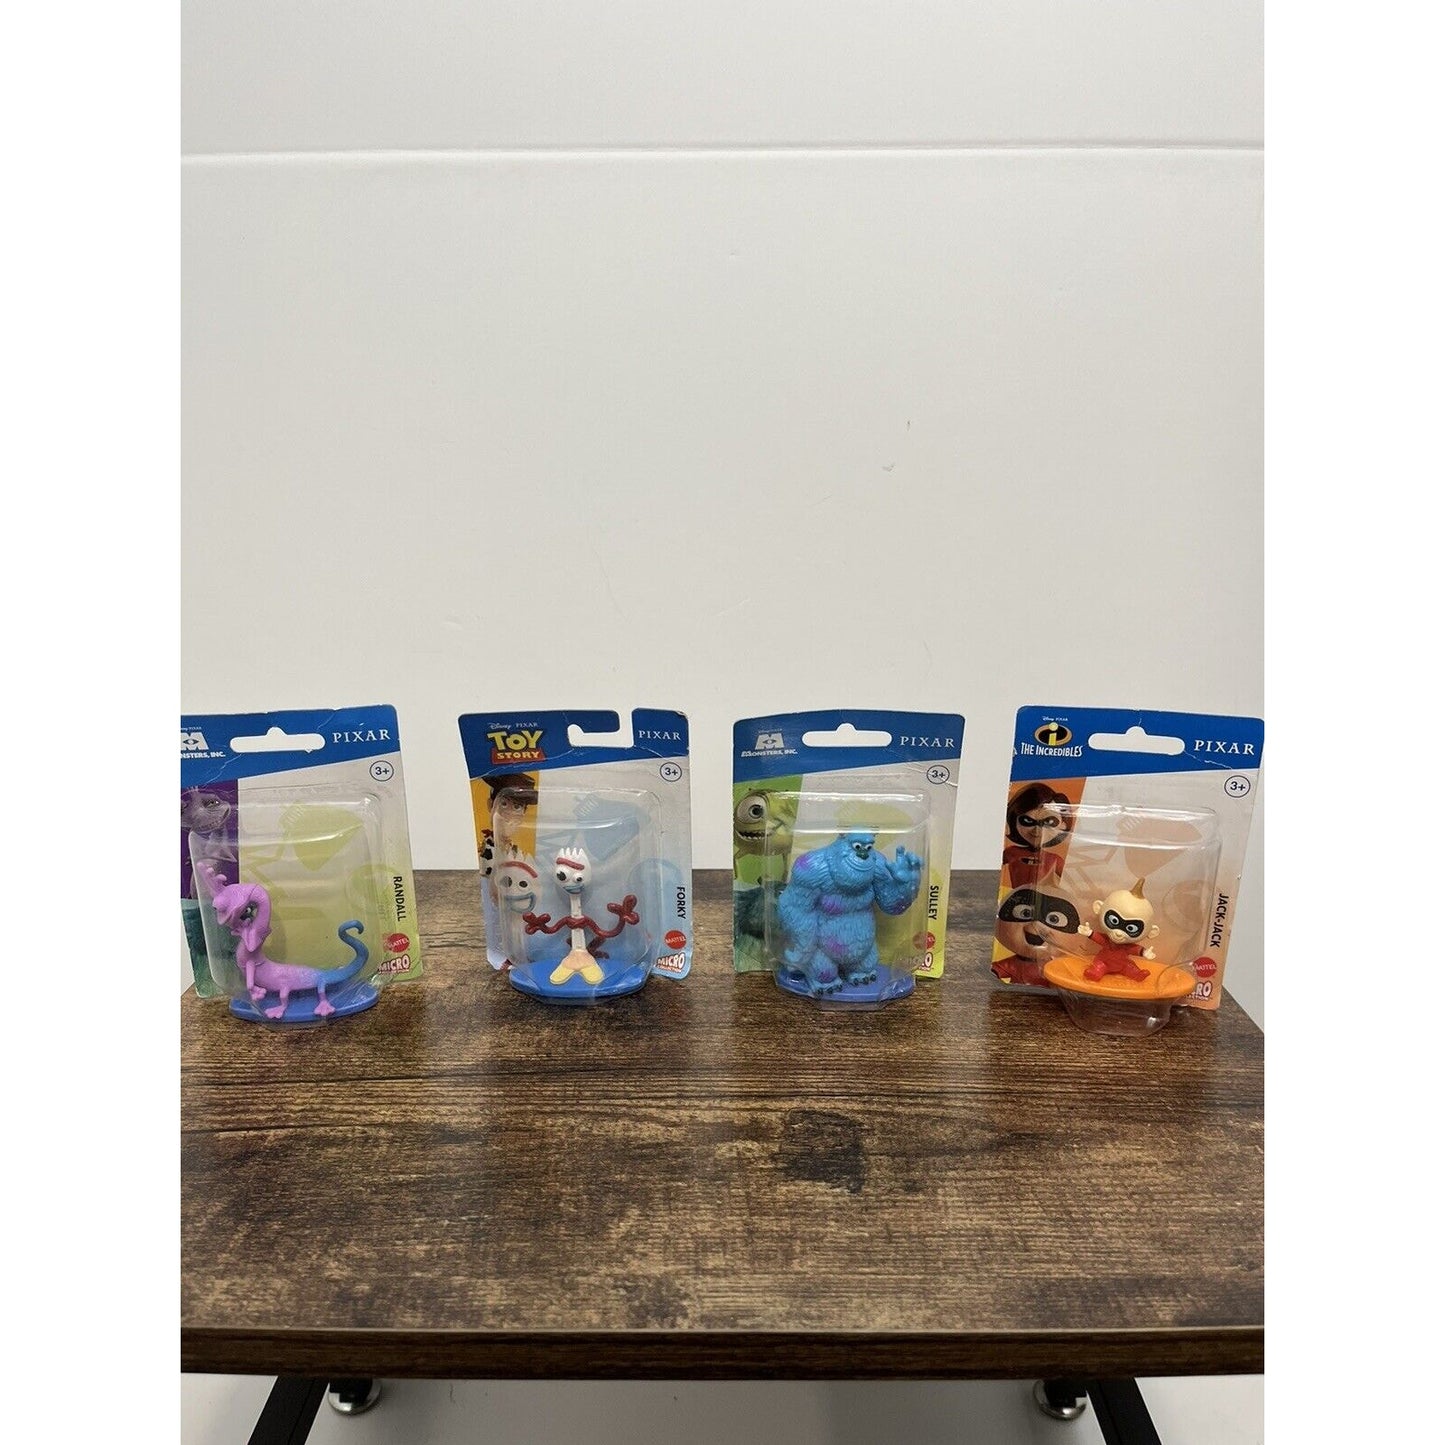 Disney Pixar Toy Story Micro Collection Figurines - Lot of 4